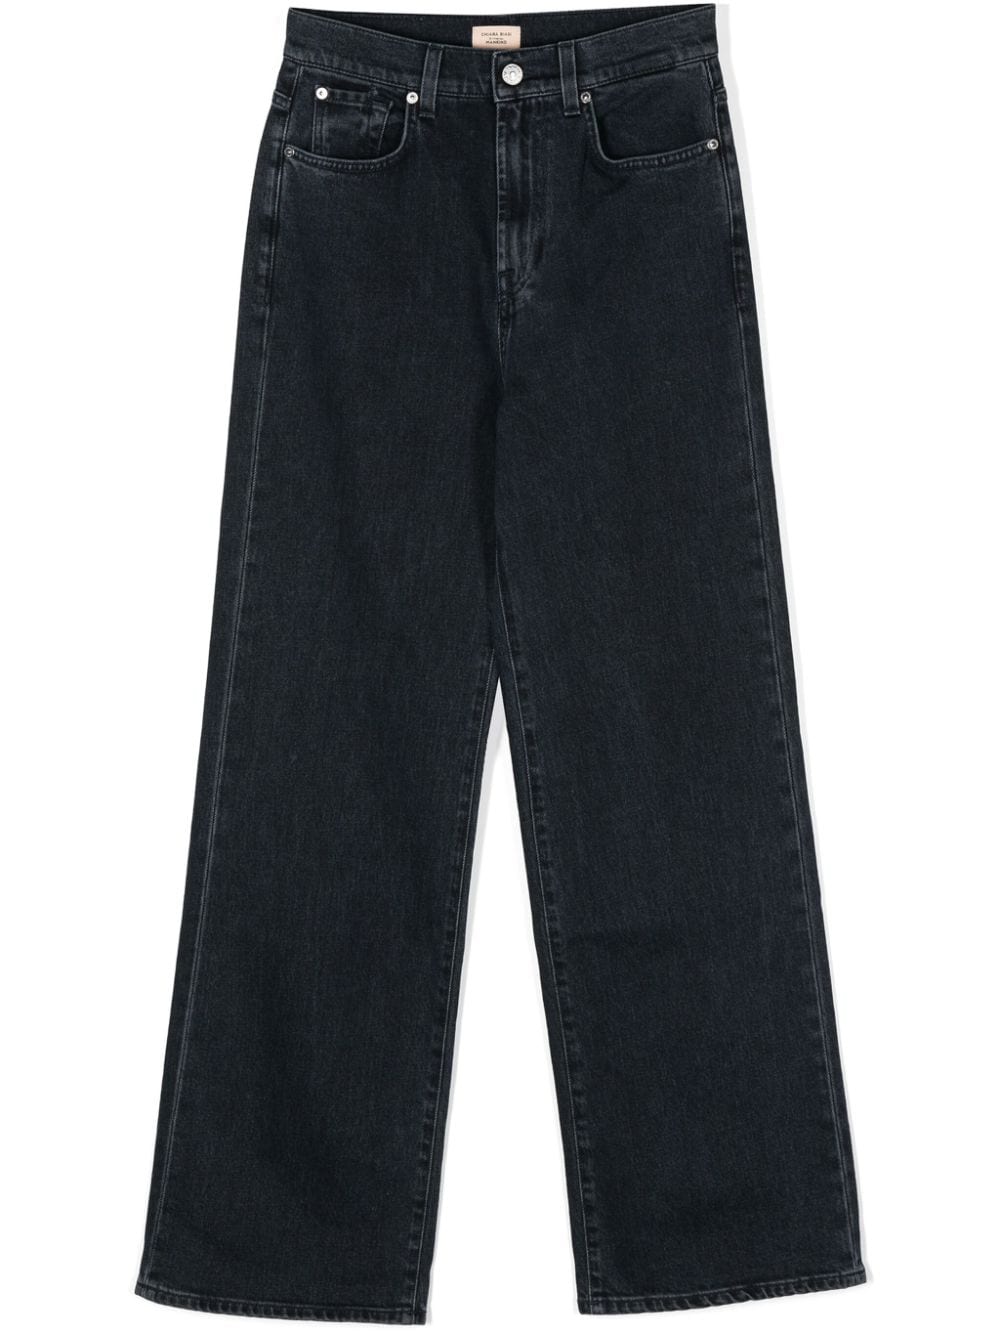 7 For All Mankind x Chiara Biasi high-rise wide-leg jeans - Blue von 7 For All Mankind